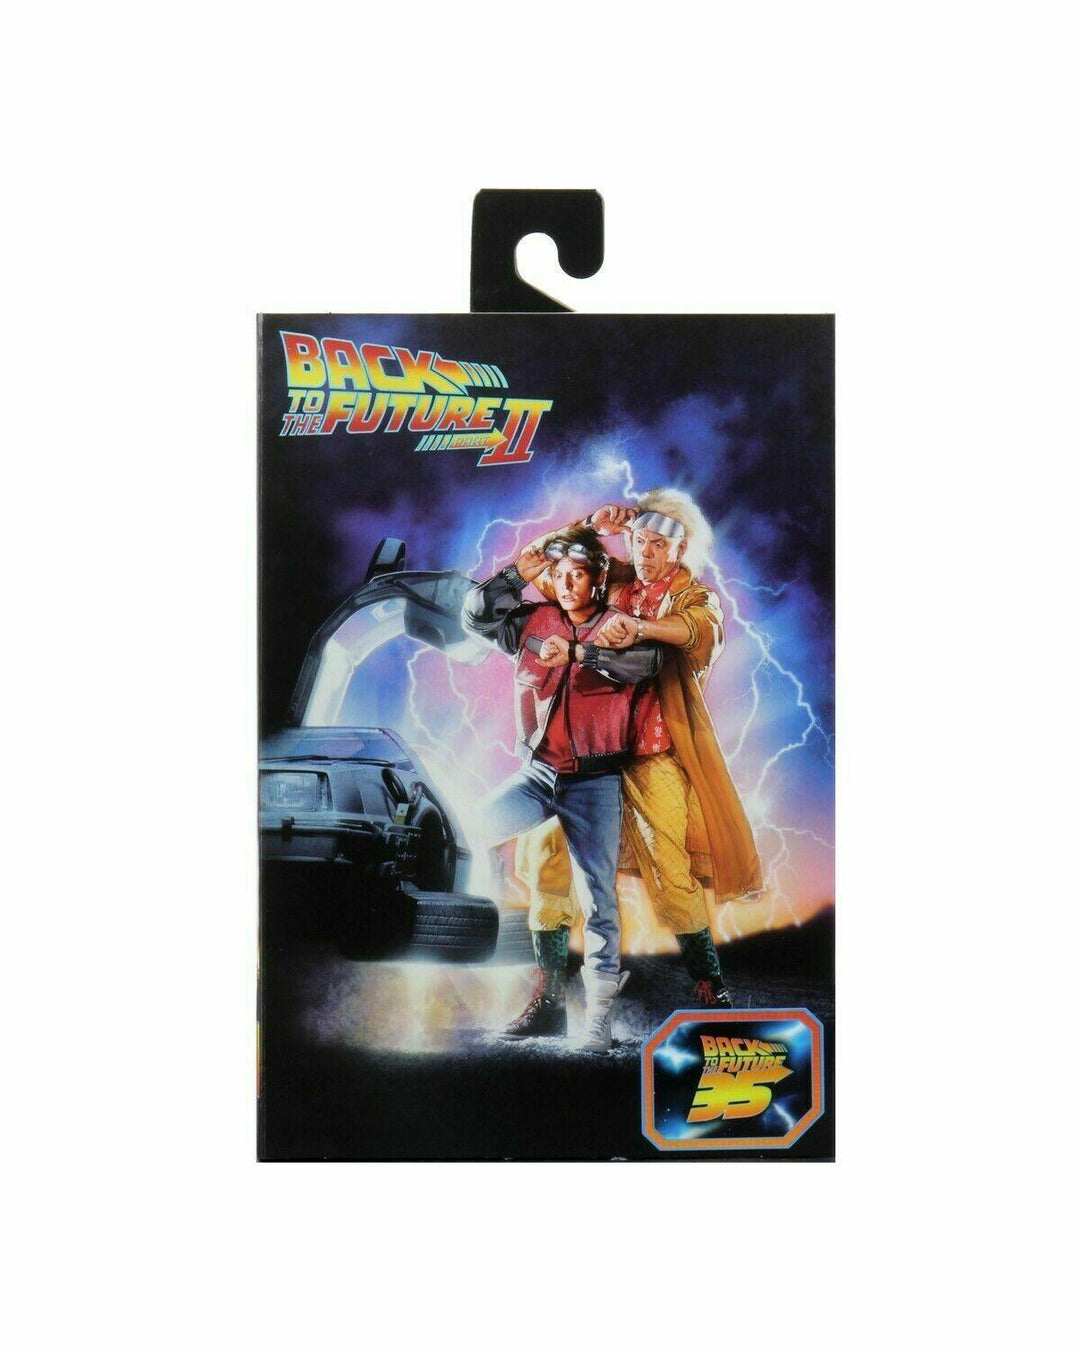 Ulltimate Marty Mcfly - Back To The Future 2 - Neca - Bobbis Store Hunde